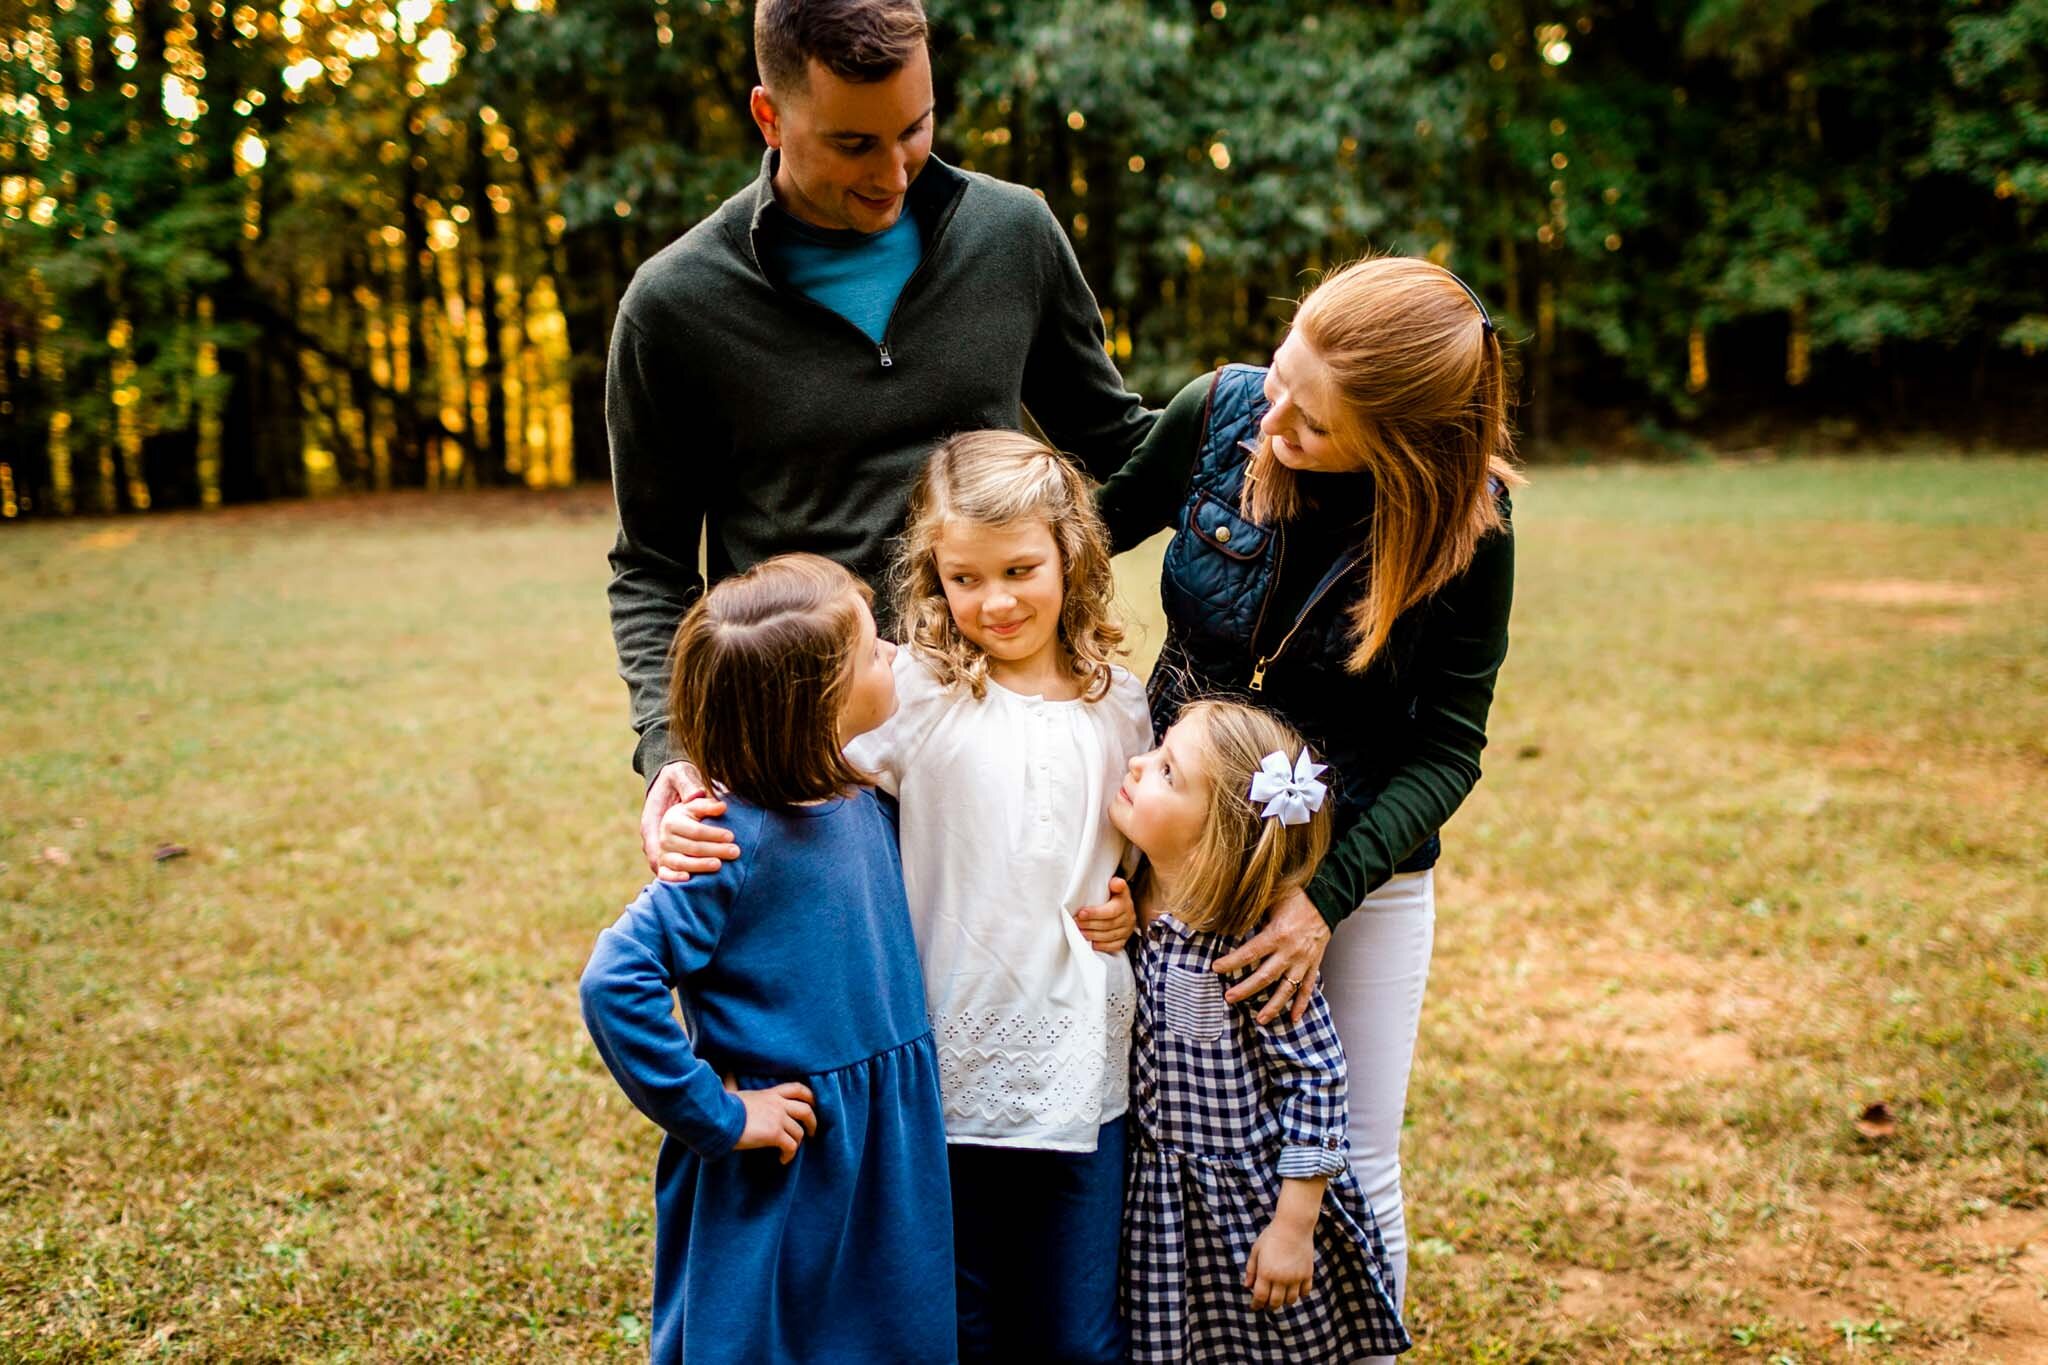 Raleigh Family Photographer | Umstead Park | By G. Lin Photography | Candid family photo outdoors